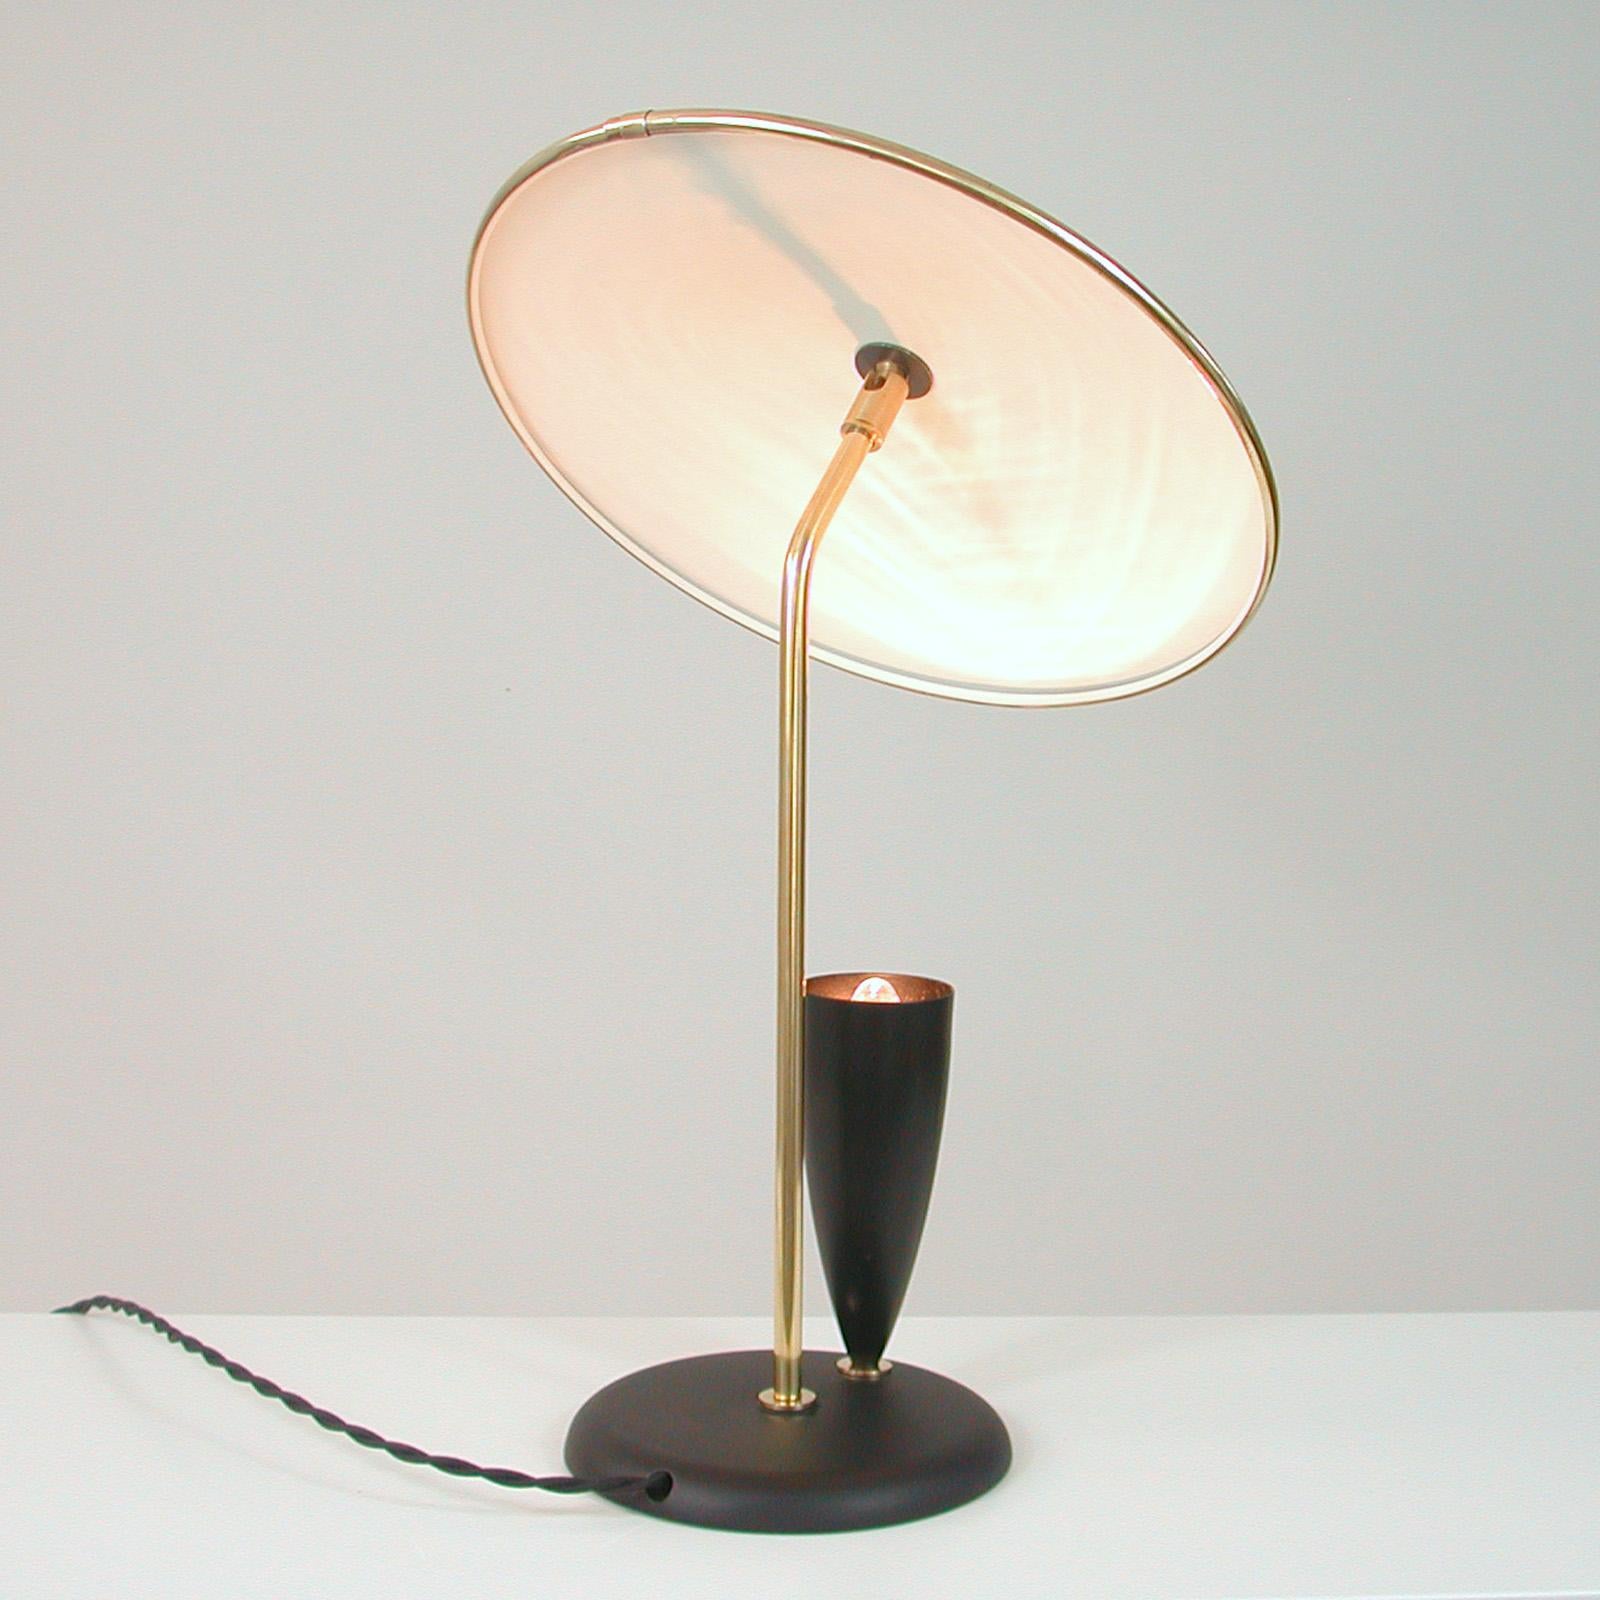 Metal French Midcentury Reflecting Black and Brass Table Lamp, 1950s For Sale